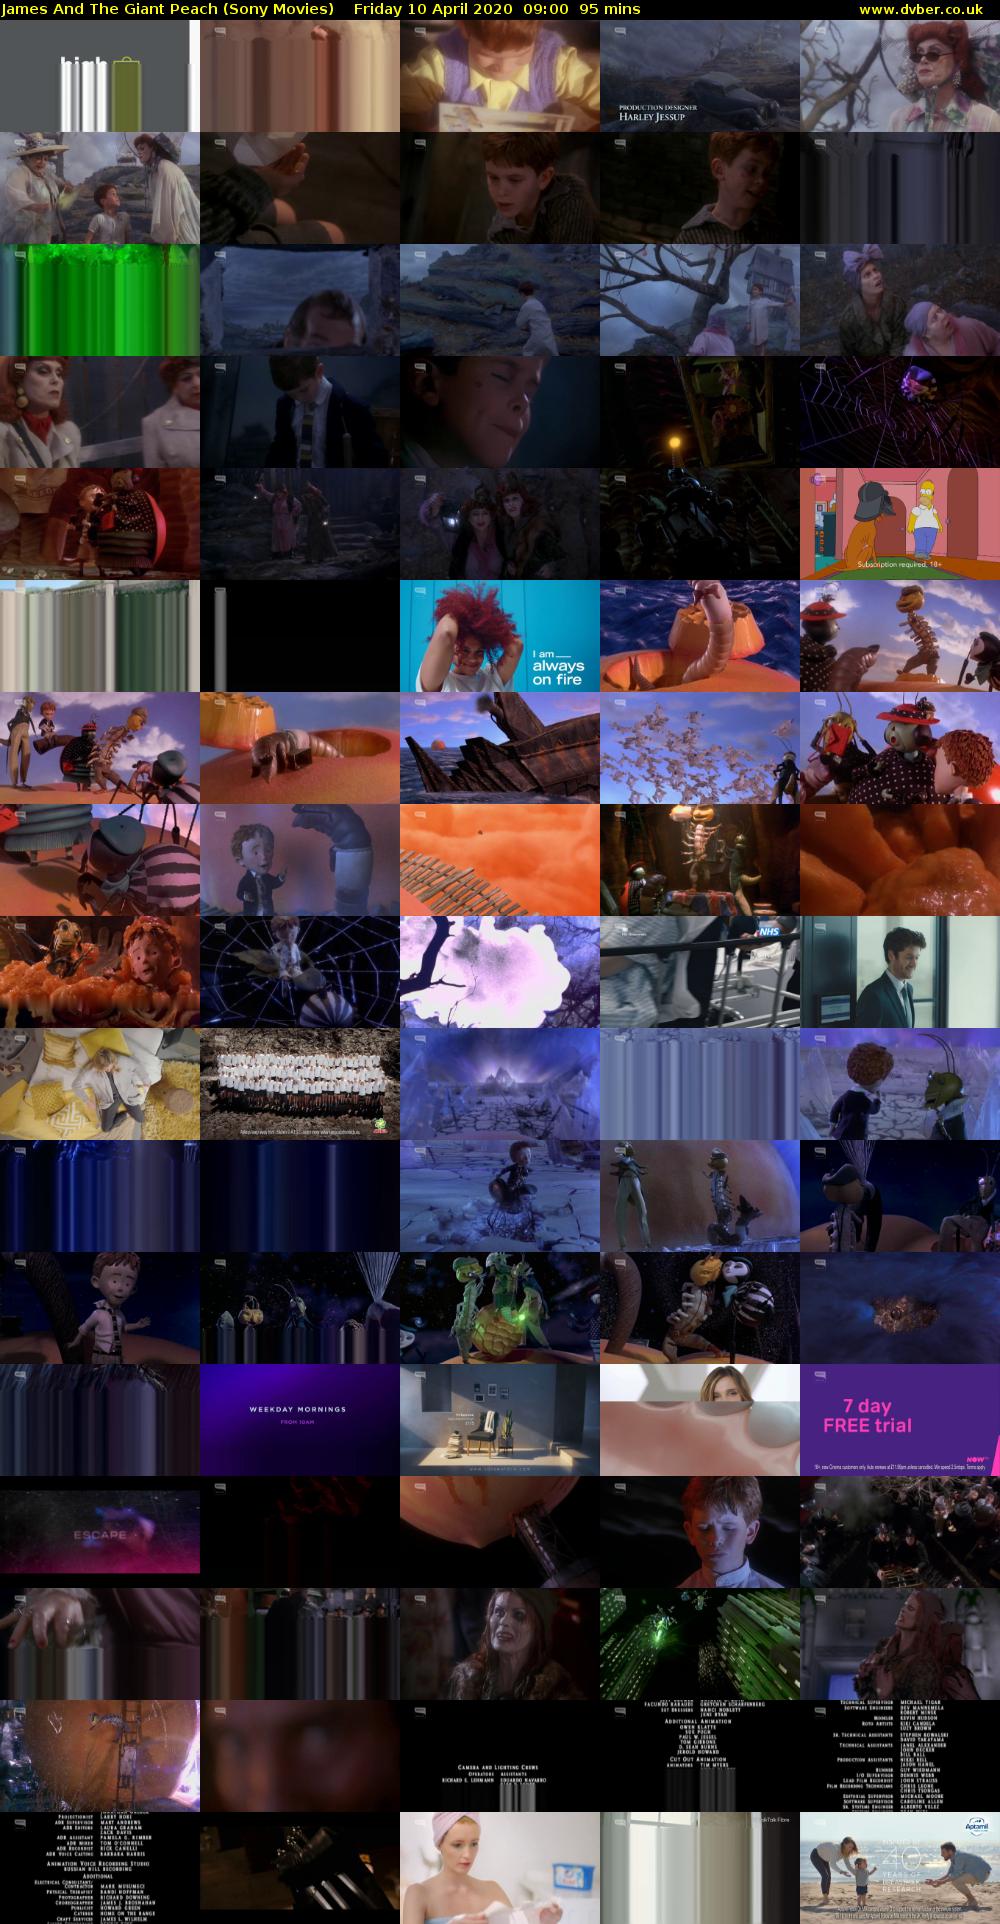 James And The Giant Peach (Sony Movies) Friday 10 April 2020 09:00 - 10:35